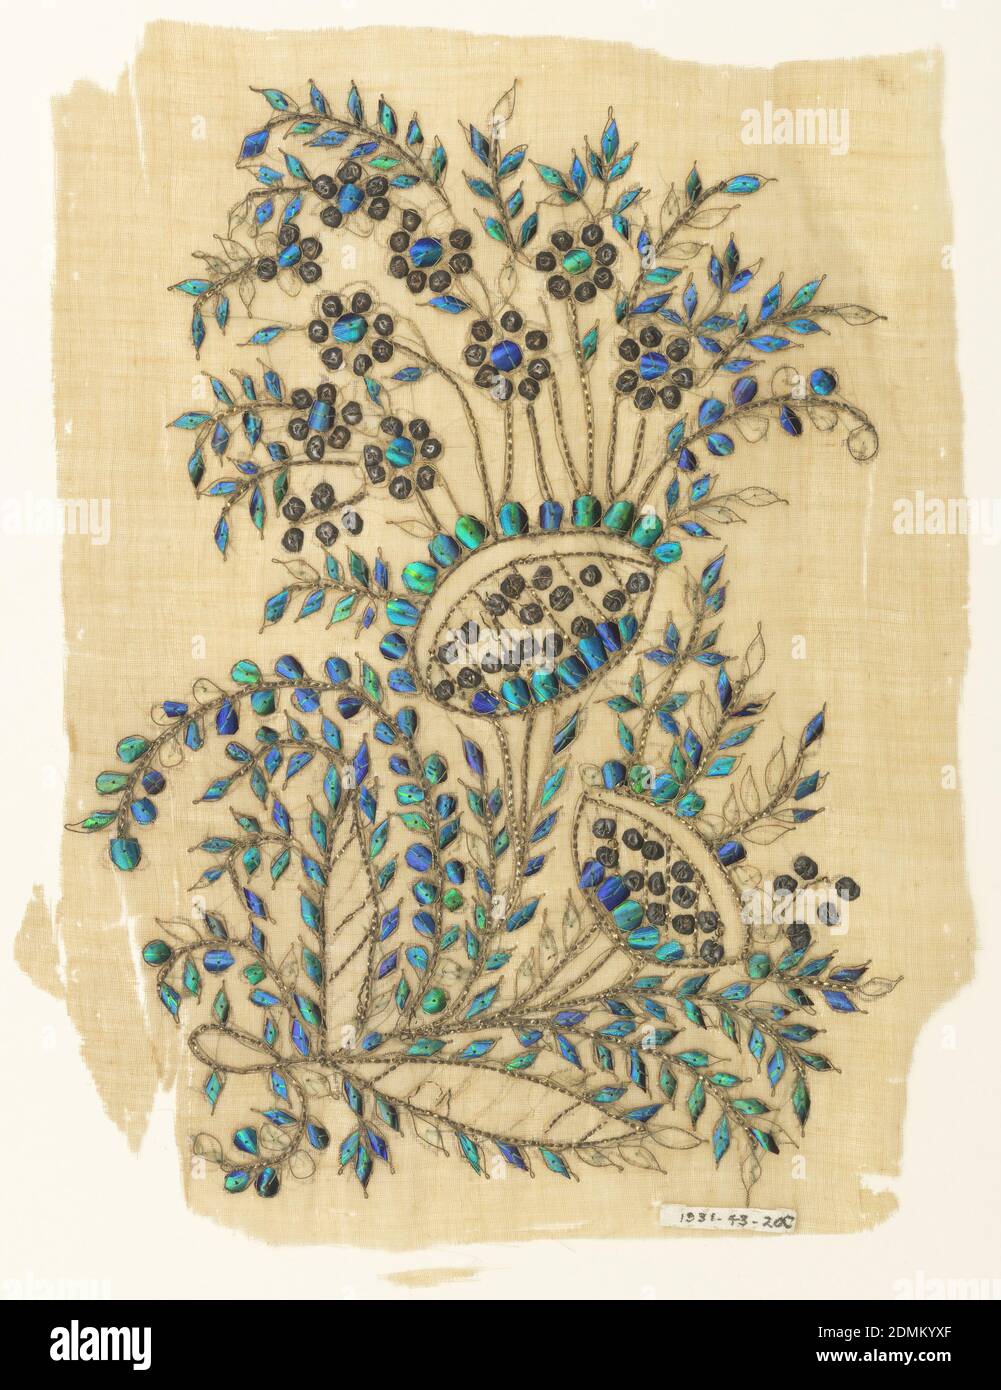 Fragment, Medium: cotton ground, beetle elytra, gold foil strips, gilt sequins, gold metal-wrapped silk thread Technique: plain weave embroidered with cut beetle wings and sequins, Off-white cotton sheer ground with embroidered design of a stylized floral spray with two large blossoms and numerous small ones curving to the left. The vines are executed in gold foil strips, the small flowers in gilt sequins, and the leaves in beetle elytra., India, mid- 19th century, embroidery & stitching, Fragment Stock Photo